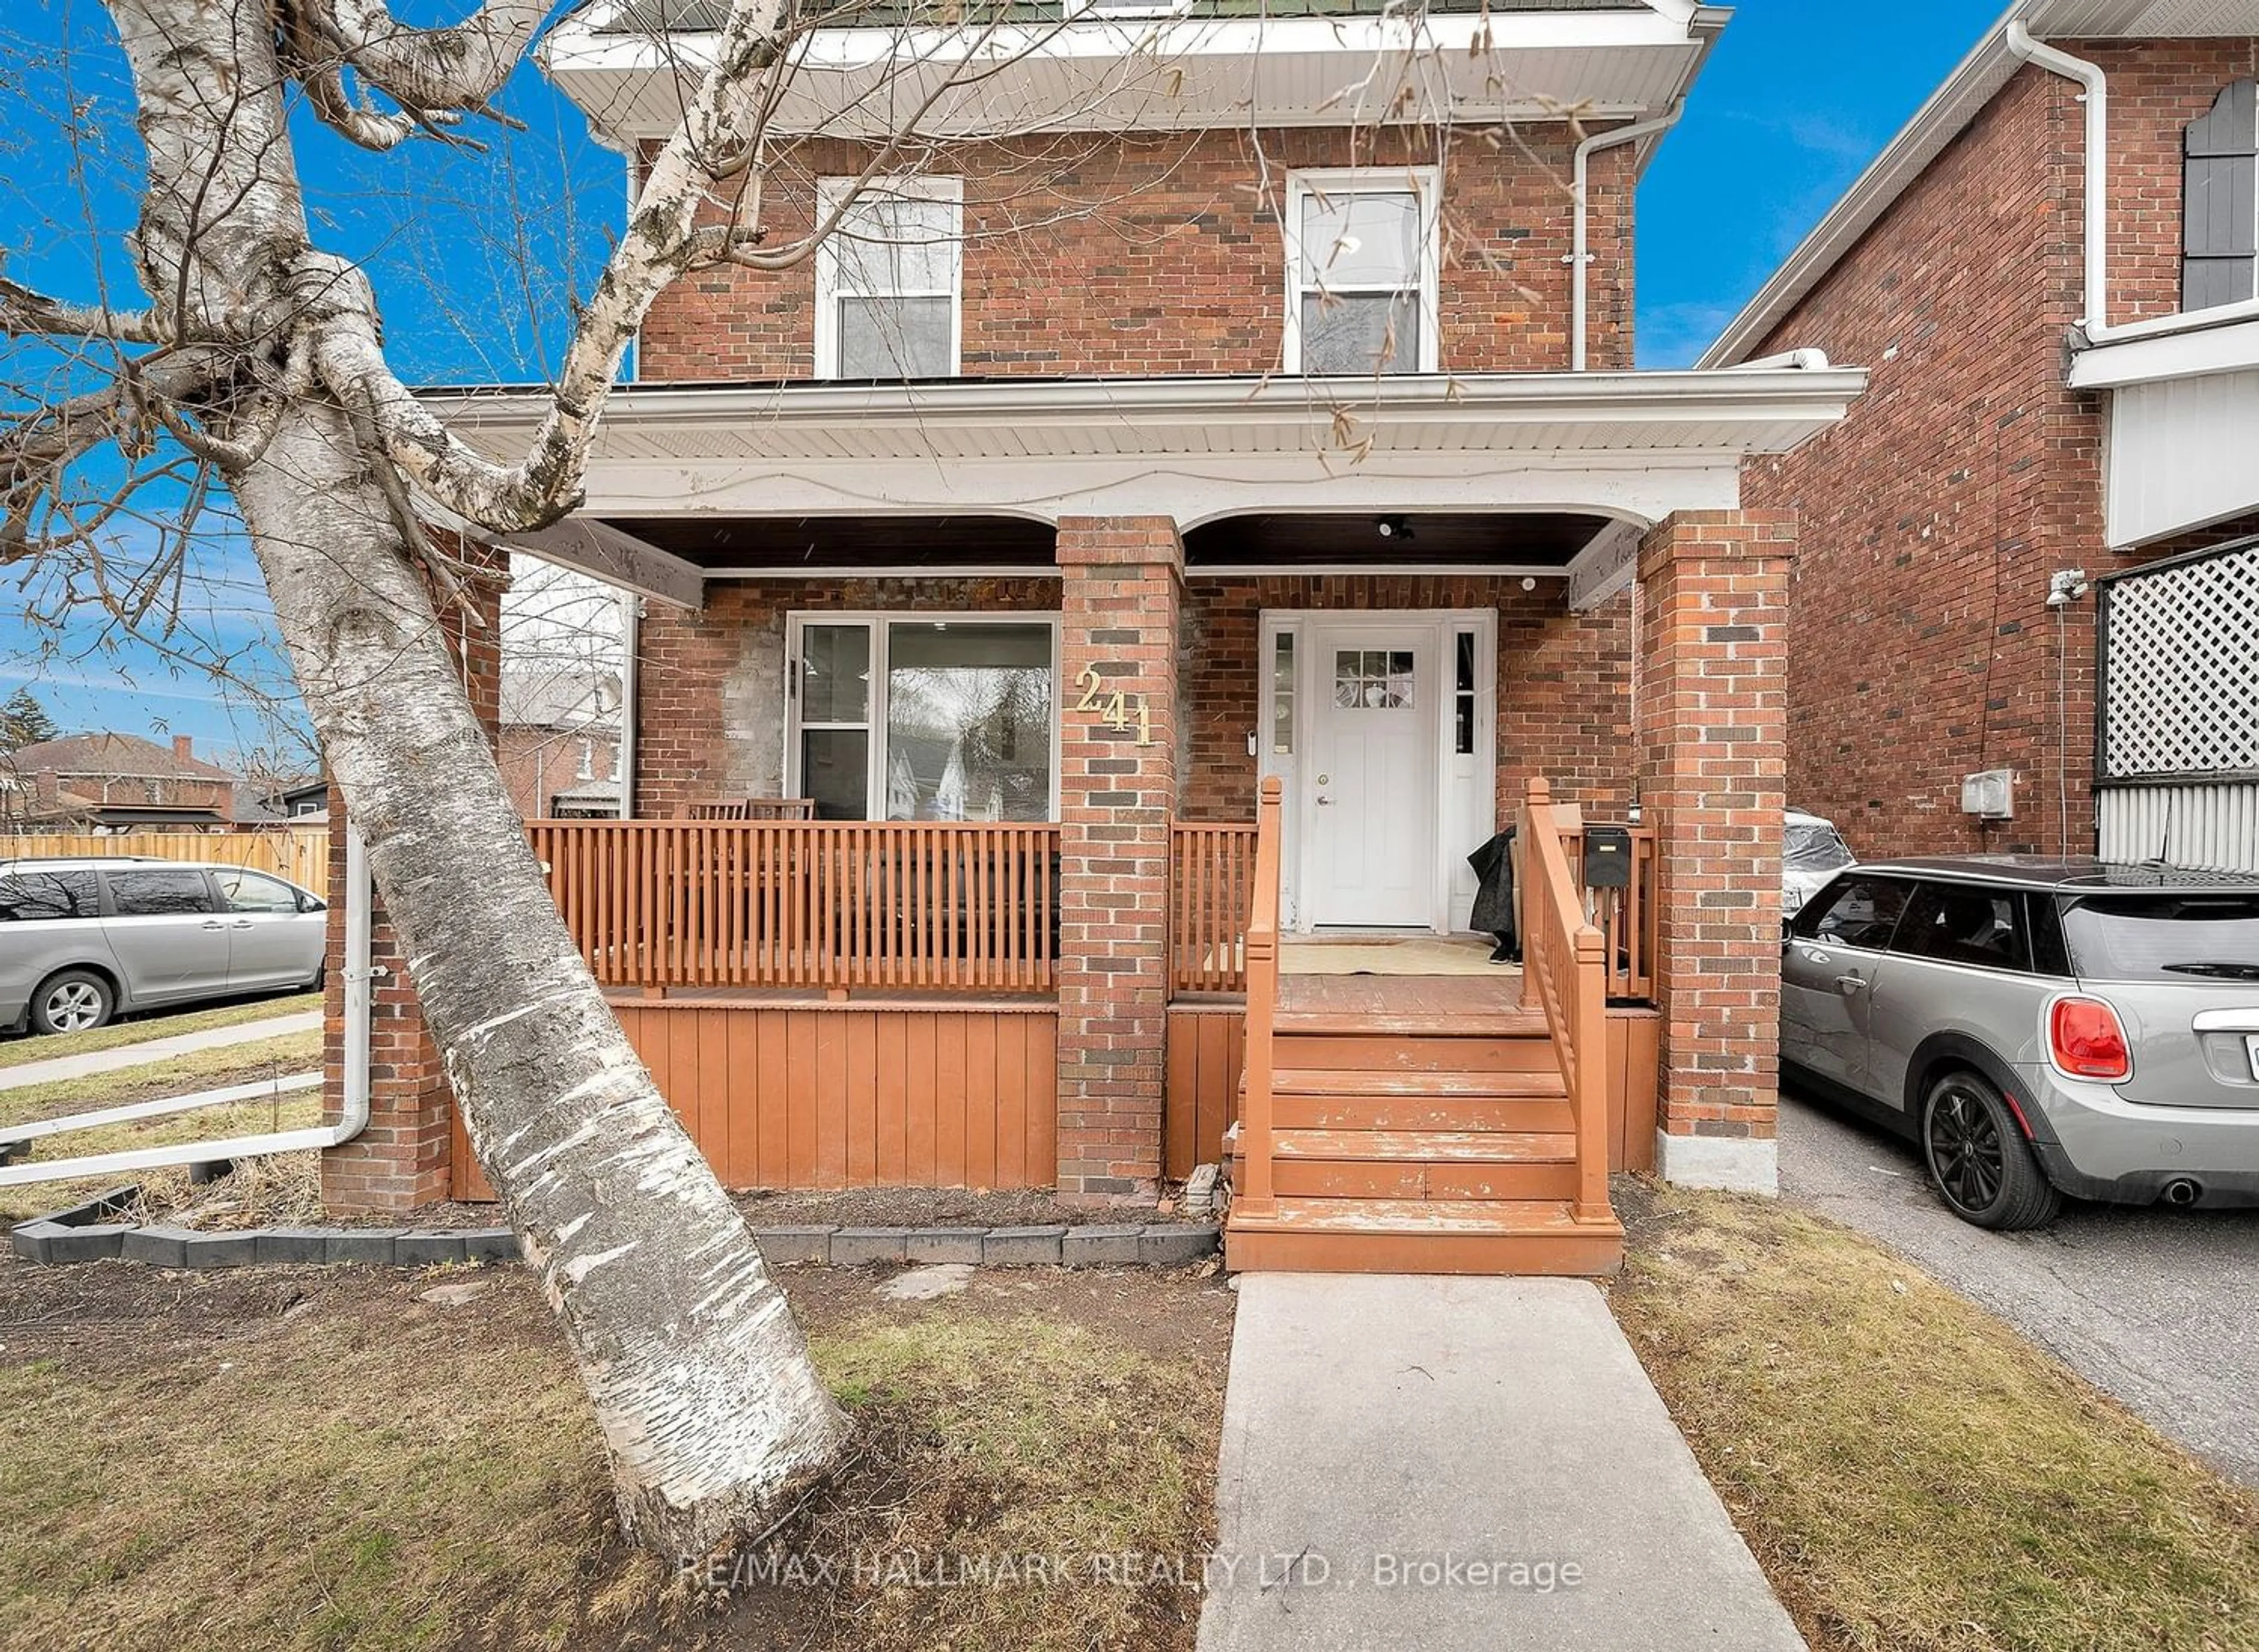 Home with brick exterior material for 241 Eulalie Ave, Oshawa Ontario L1H 2B3